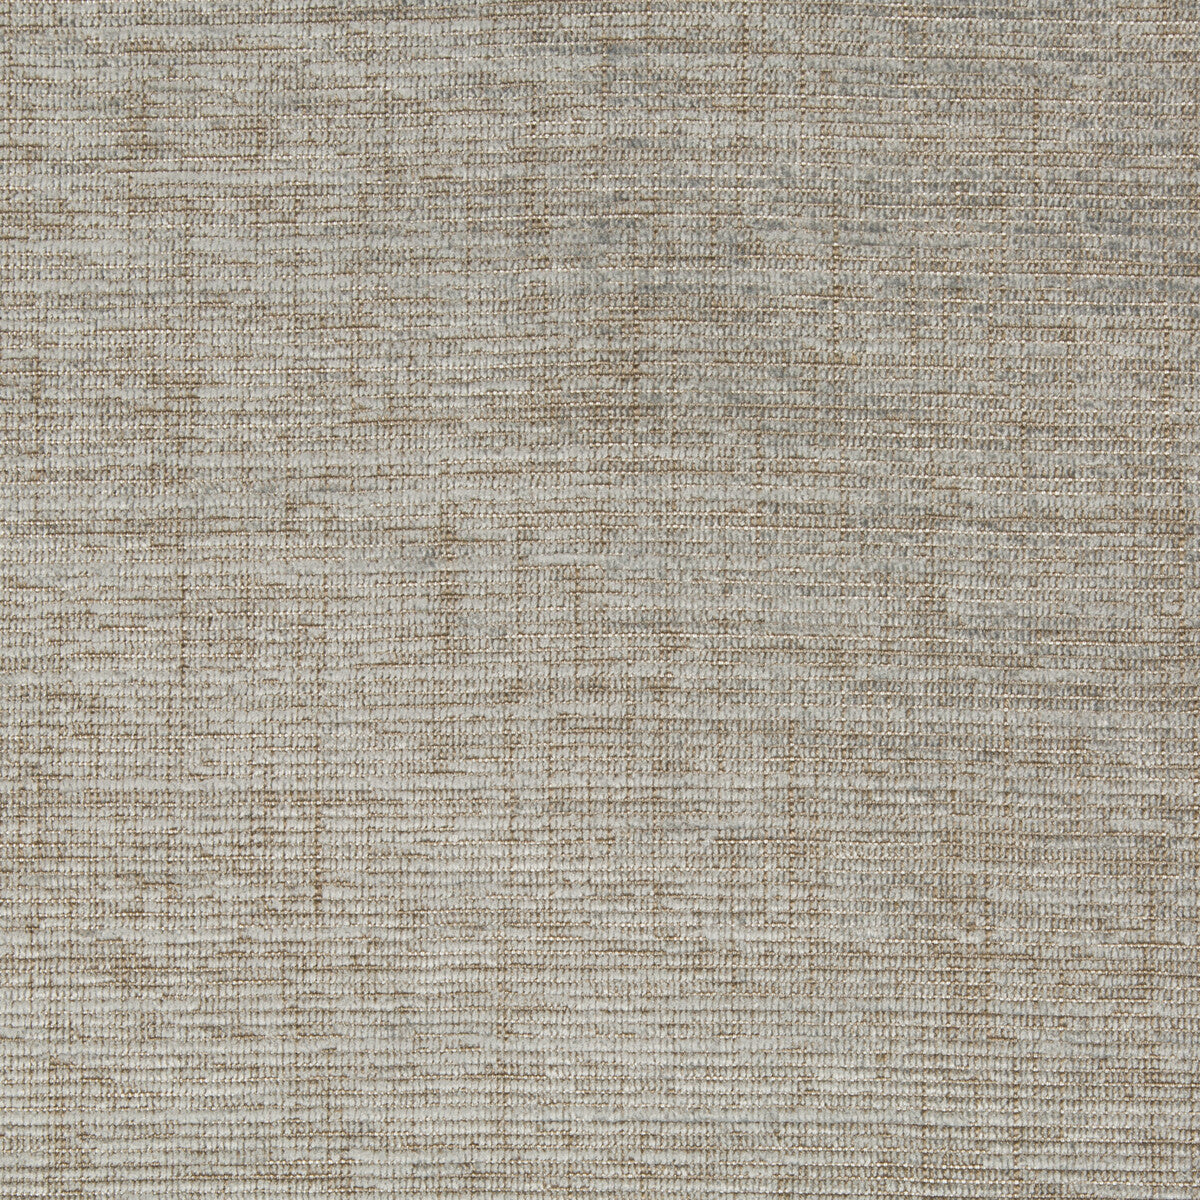 Mineralogy fabric in heron color - pattern 34842.52.0 - by Kravet Couture in the Barbara Barry Panorama collection